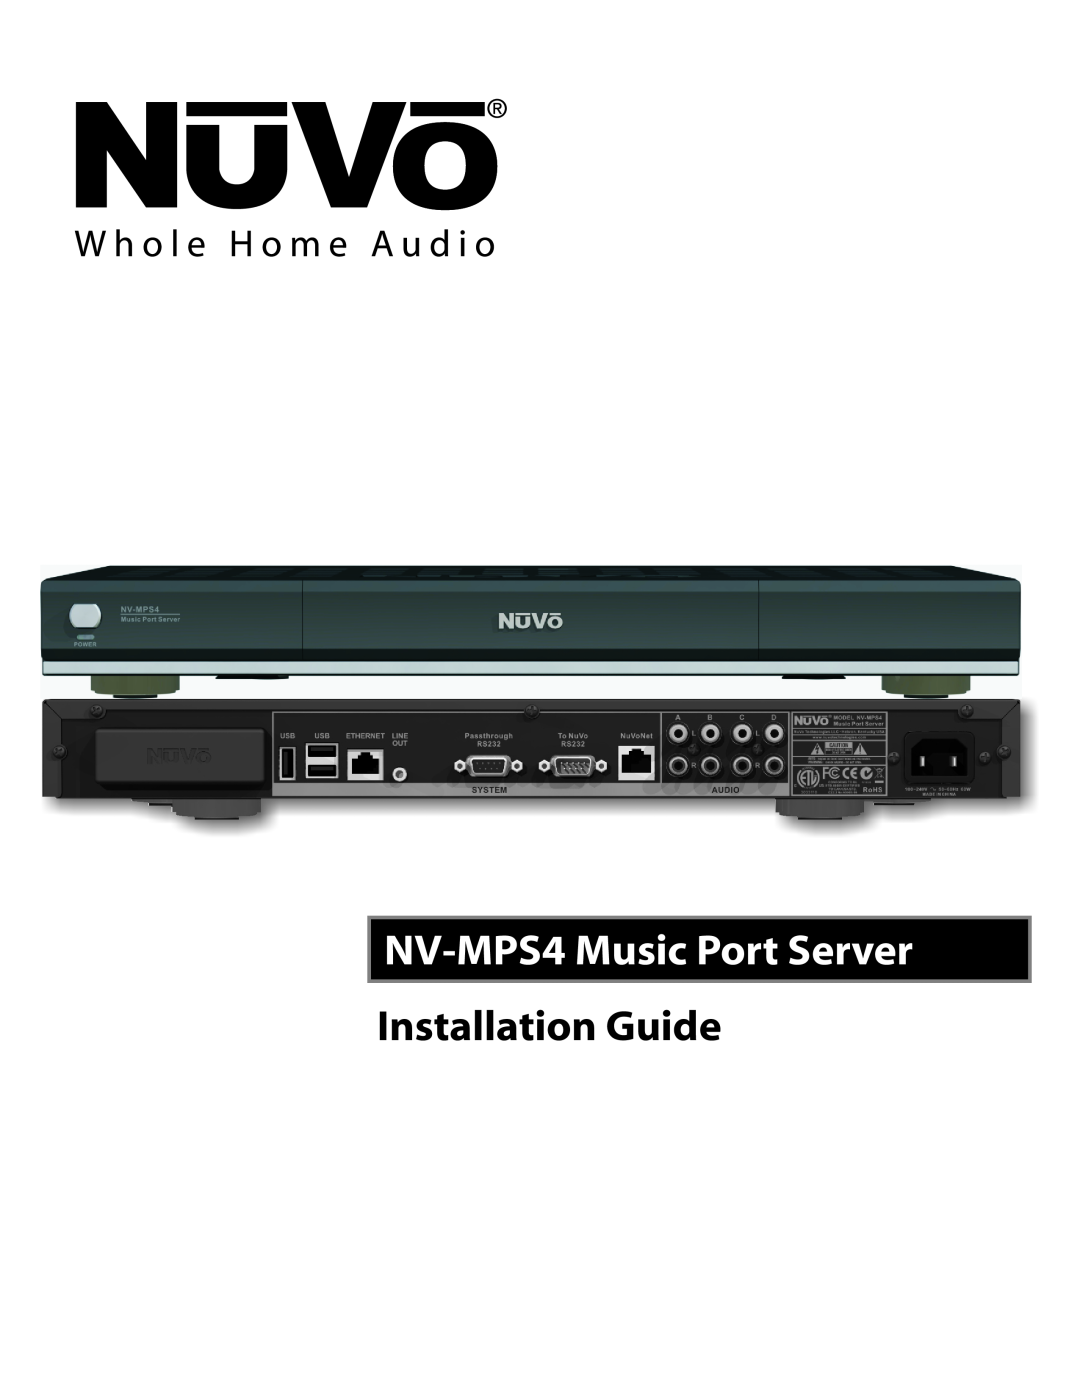 Nuvo manual NV-MPS4 Music Port Server, Installation Guide 